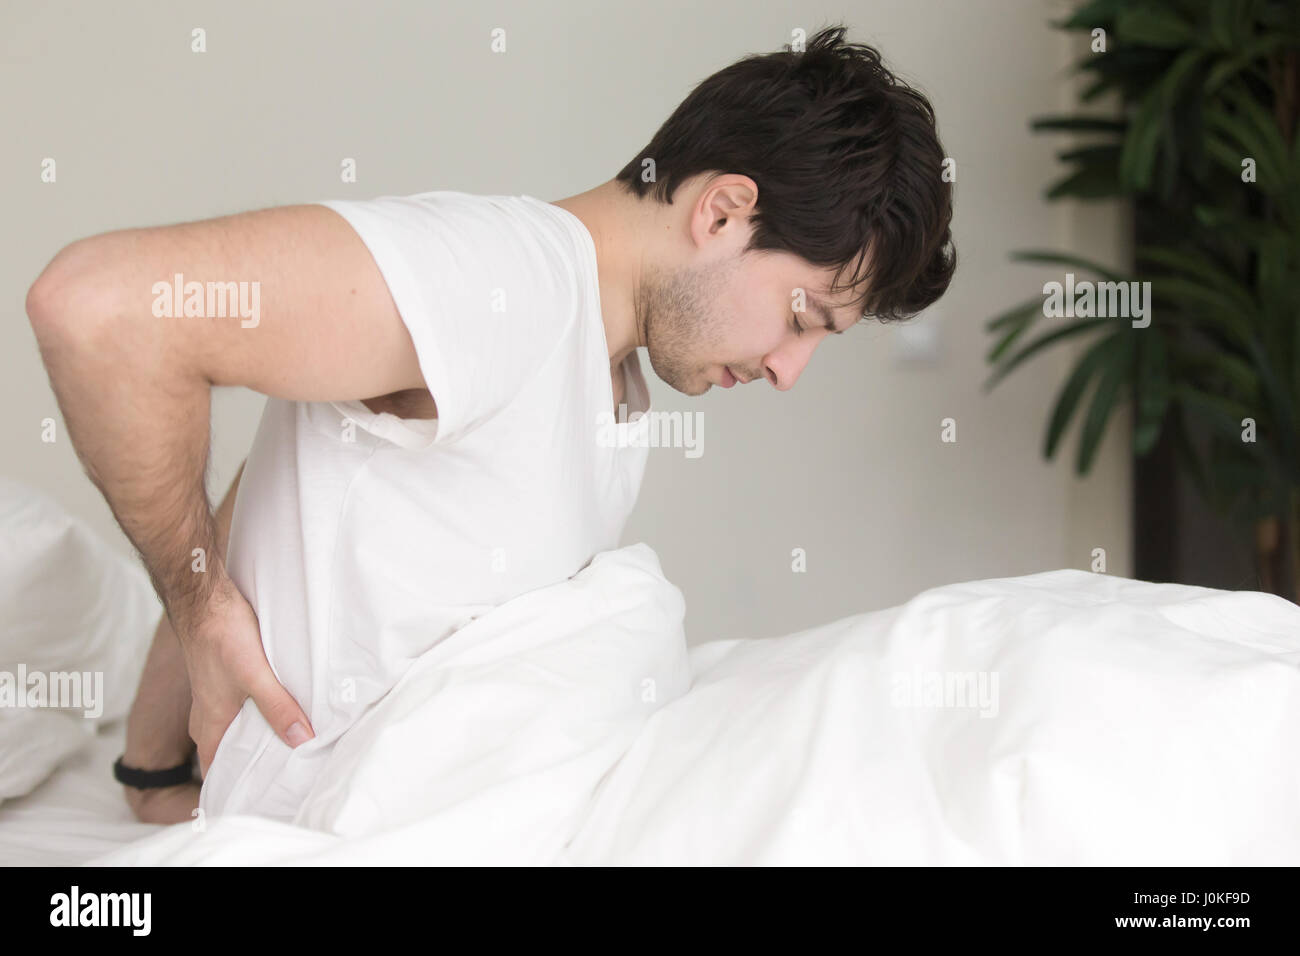 Young man sitting on bed at home touching aching back Stock Photo